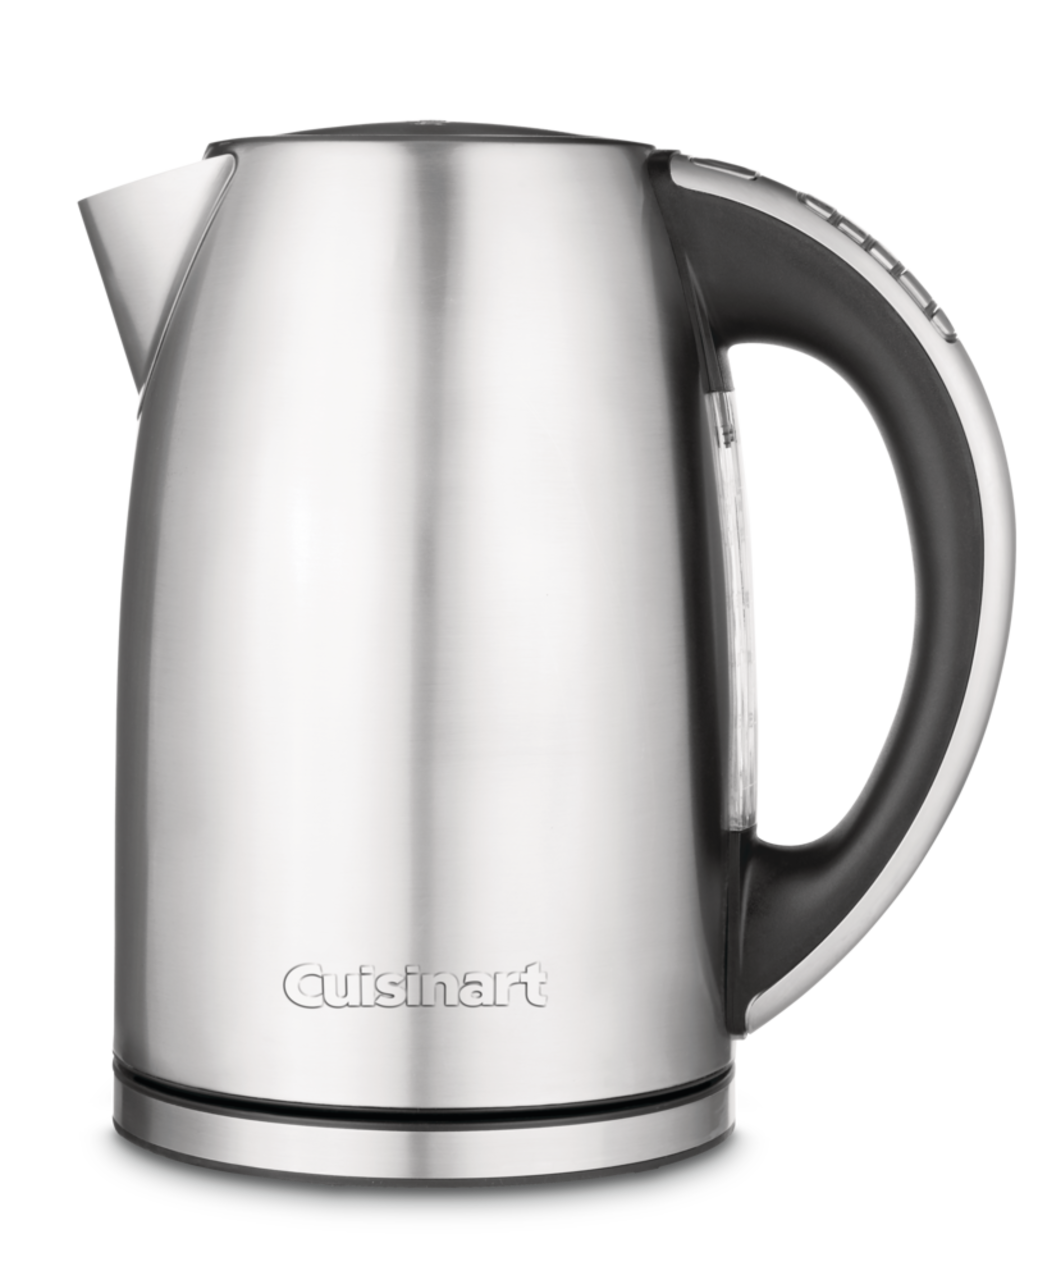 https://media-www.canadiantire.ca/product/living/kitchen/kitchen-appliances/0430265/cuis-variable-temp-s-s-kettle-4551c818-e595-4ea2-89fc-ed7a8184c001.png?imdensity=1&imwidth=1244&impolicy=mZoom